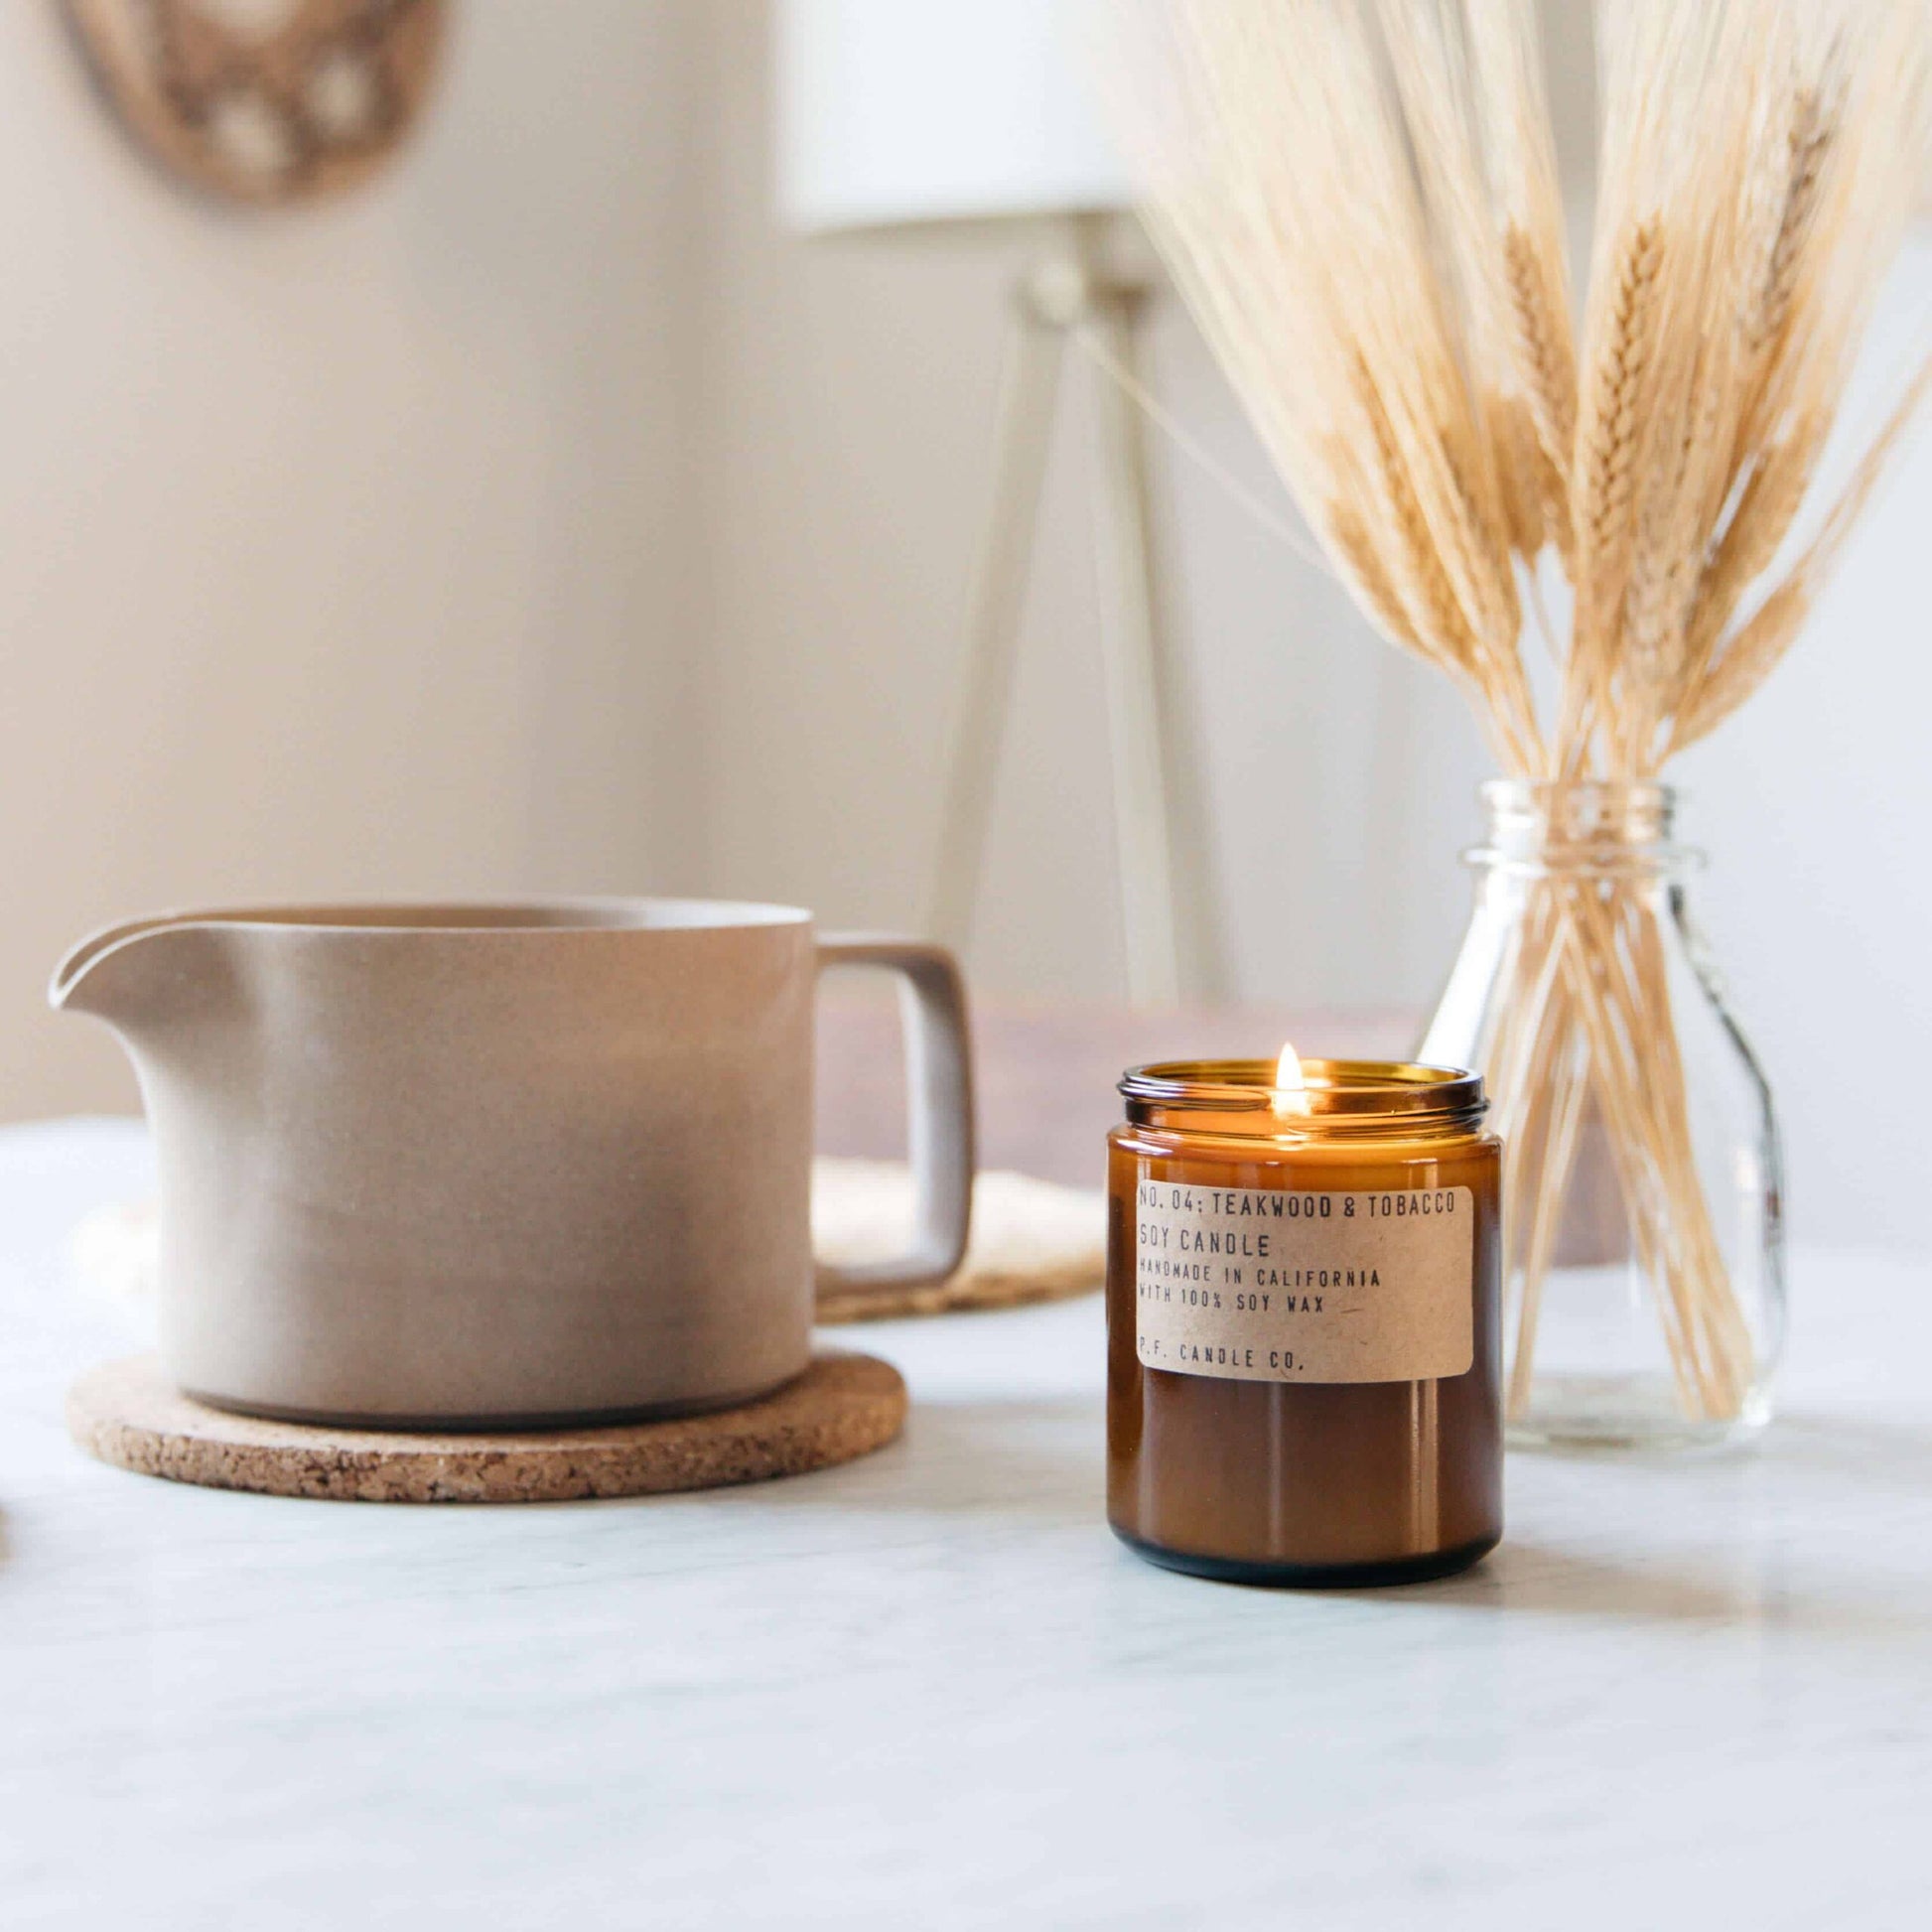 P.F. Candle Co. Teakwood & Tobacco Scented Candle - Osmology Scented Candles & Home Fragrance